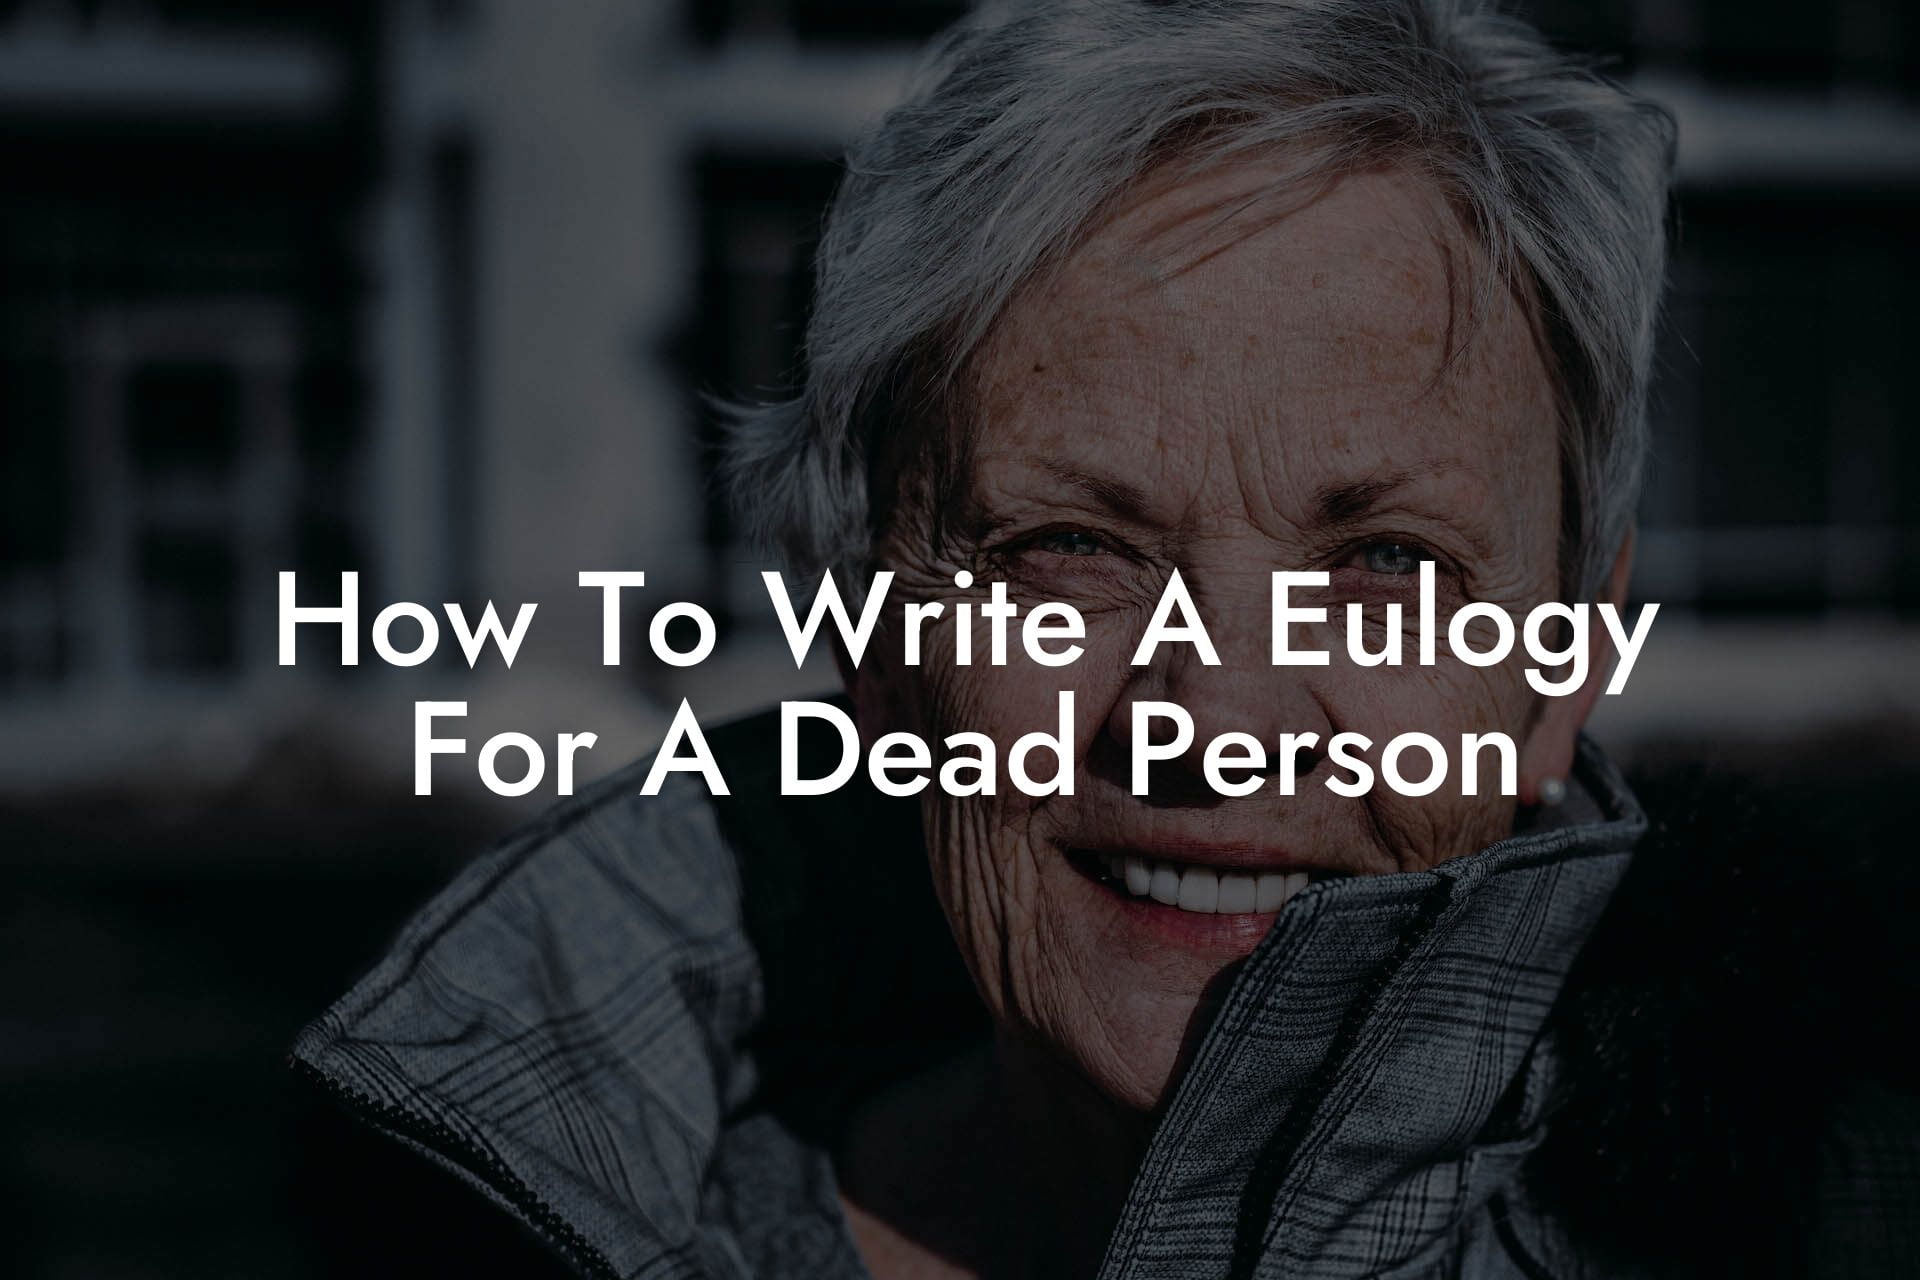 How To Write A Eulogy For A Dead Person